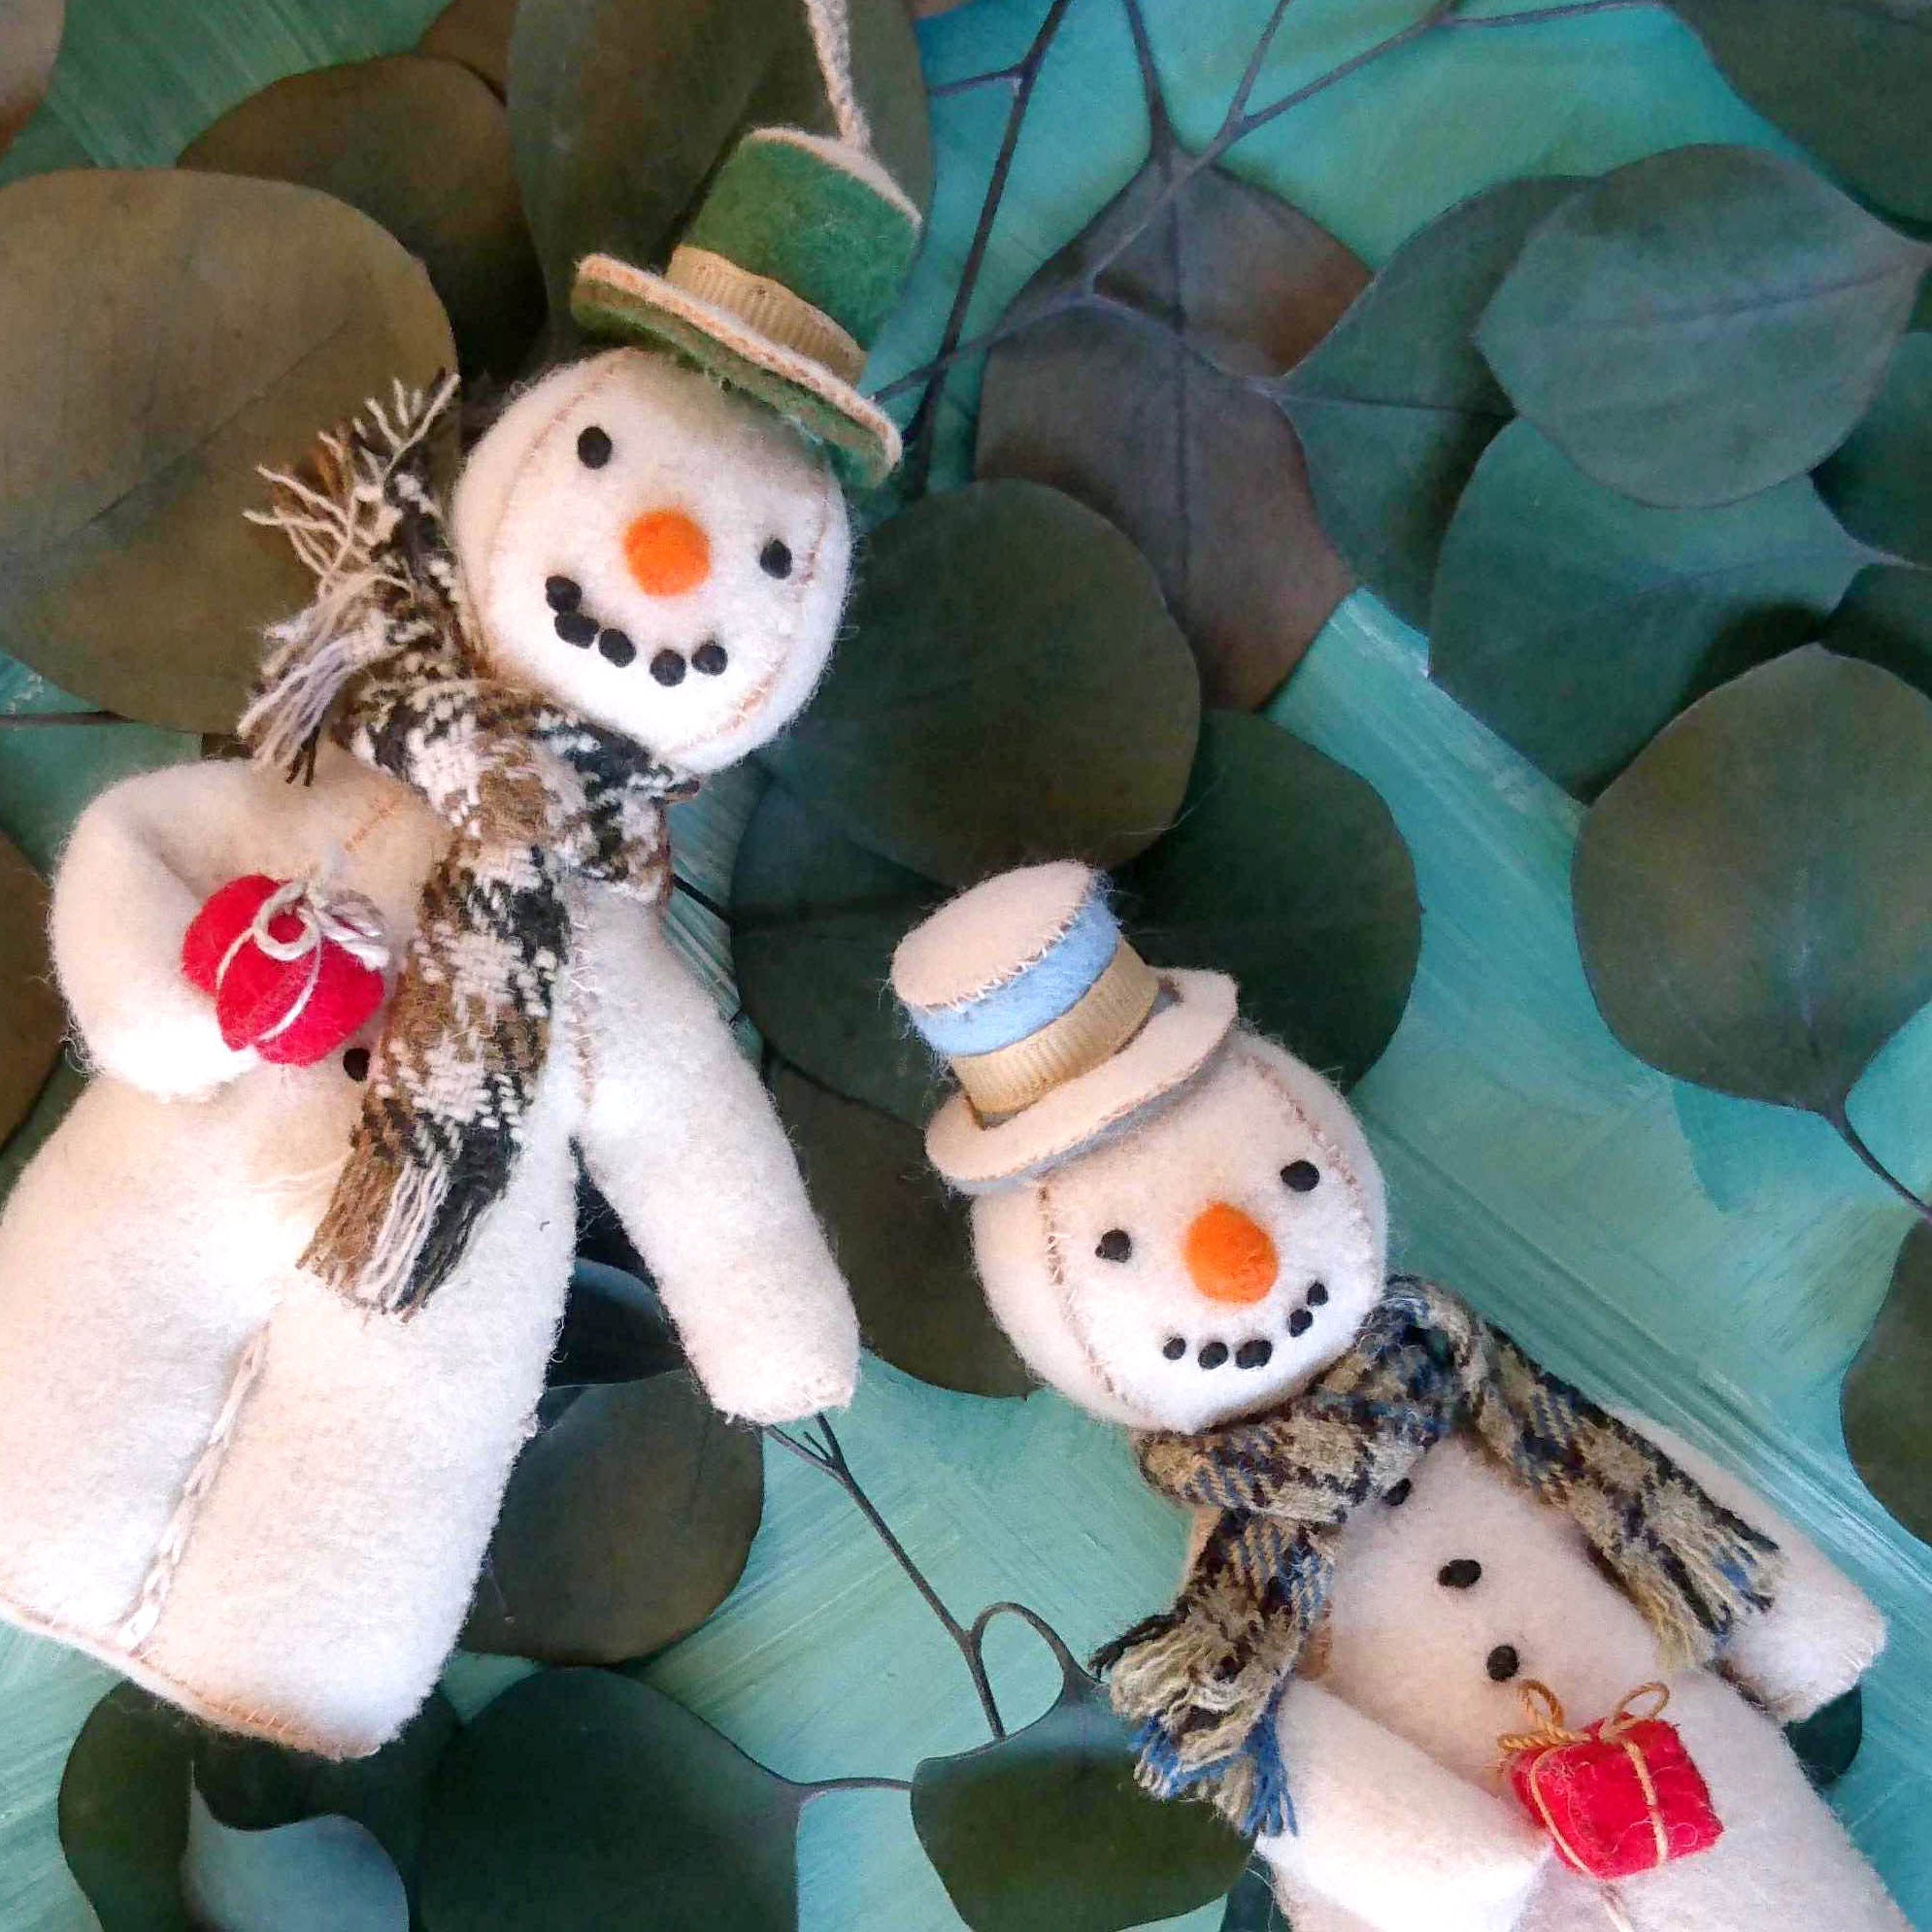 Fine-Cell-Work-Handmade-Charity-Christmas-Decorations-Snowman-with-Scarf.jpg